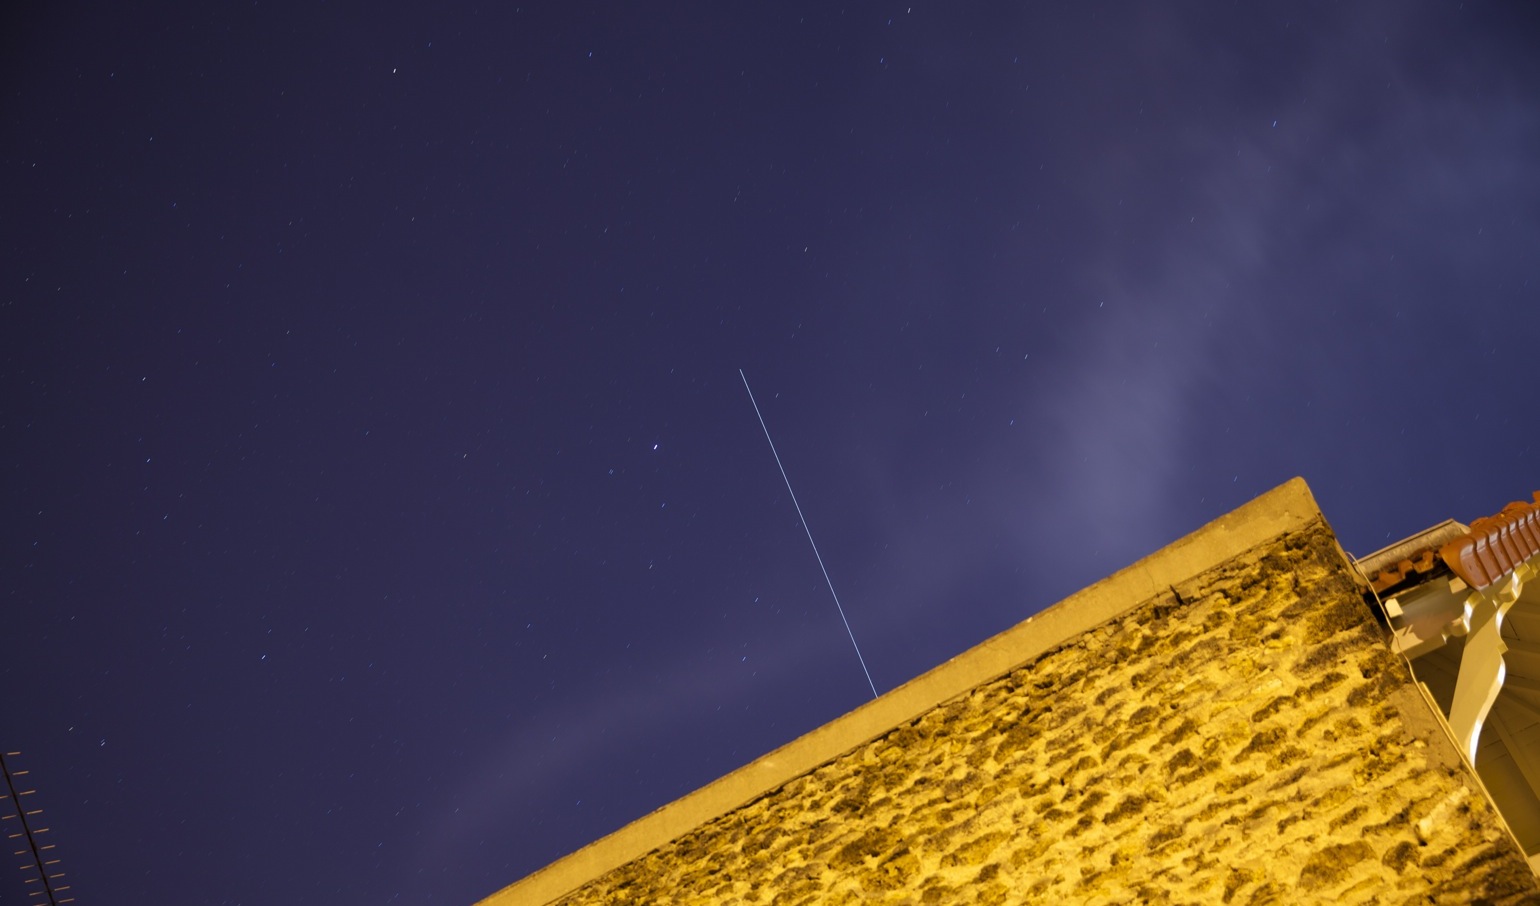 ISS on the 13th of June, 2